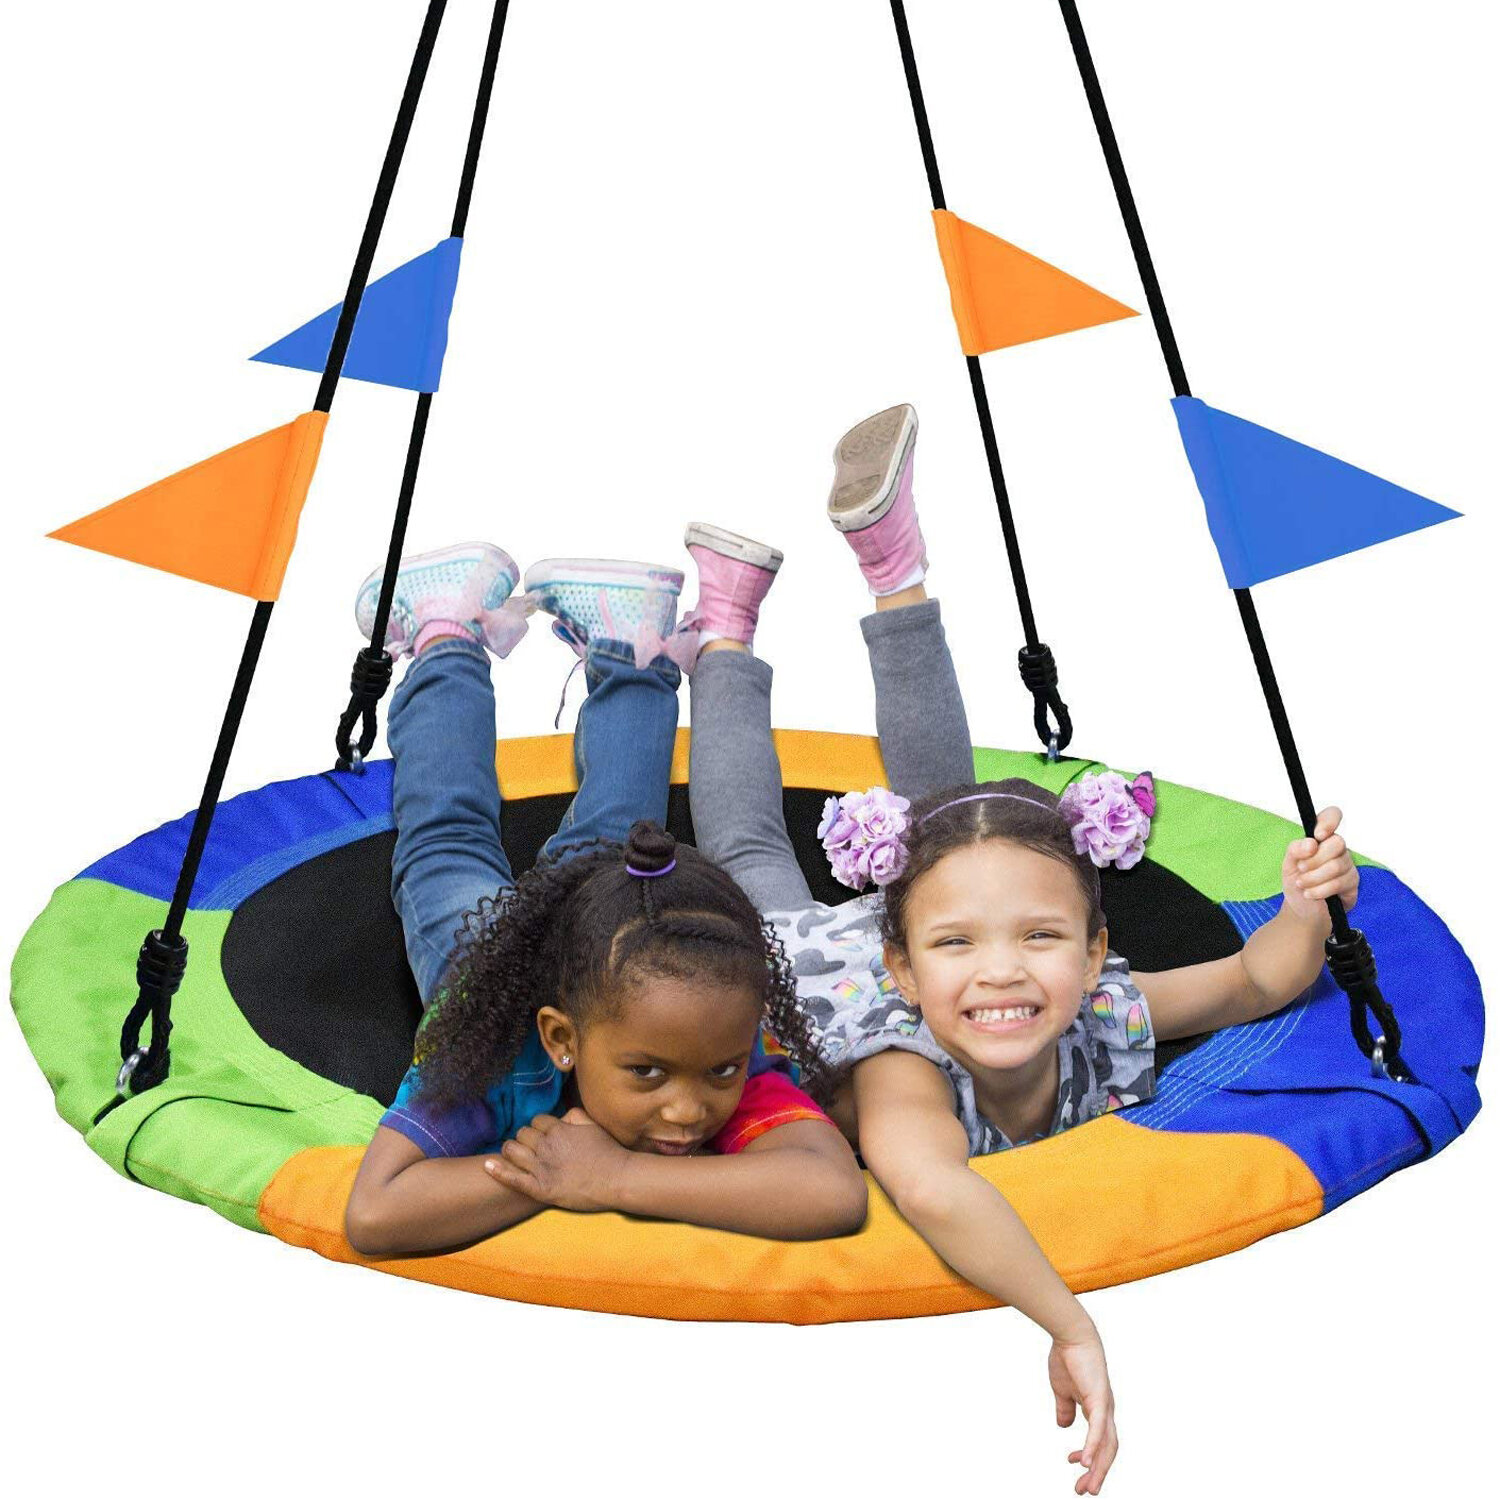 IPRee® 40 Inch 900D Saucer Tree Swing 660lb Weight Capacity With 2 Adjustable Multi-Strand Ropes Durable Camping Swing Seat for Children Adults